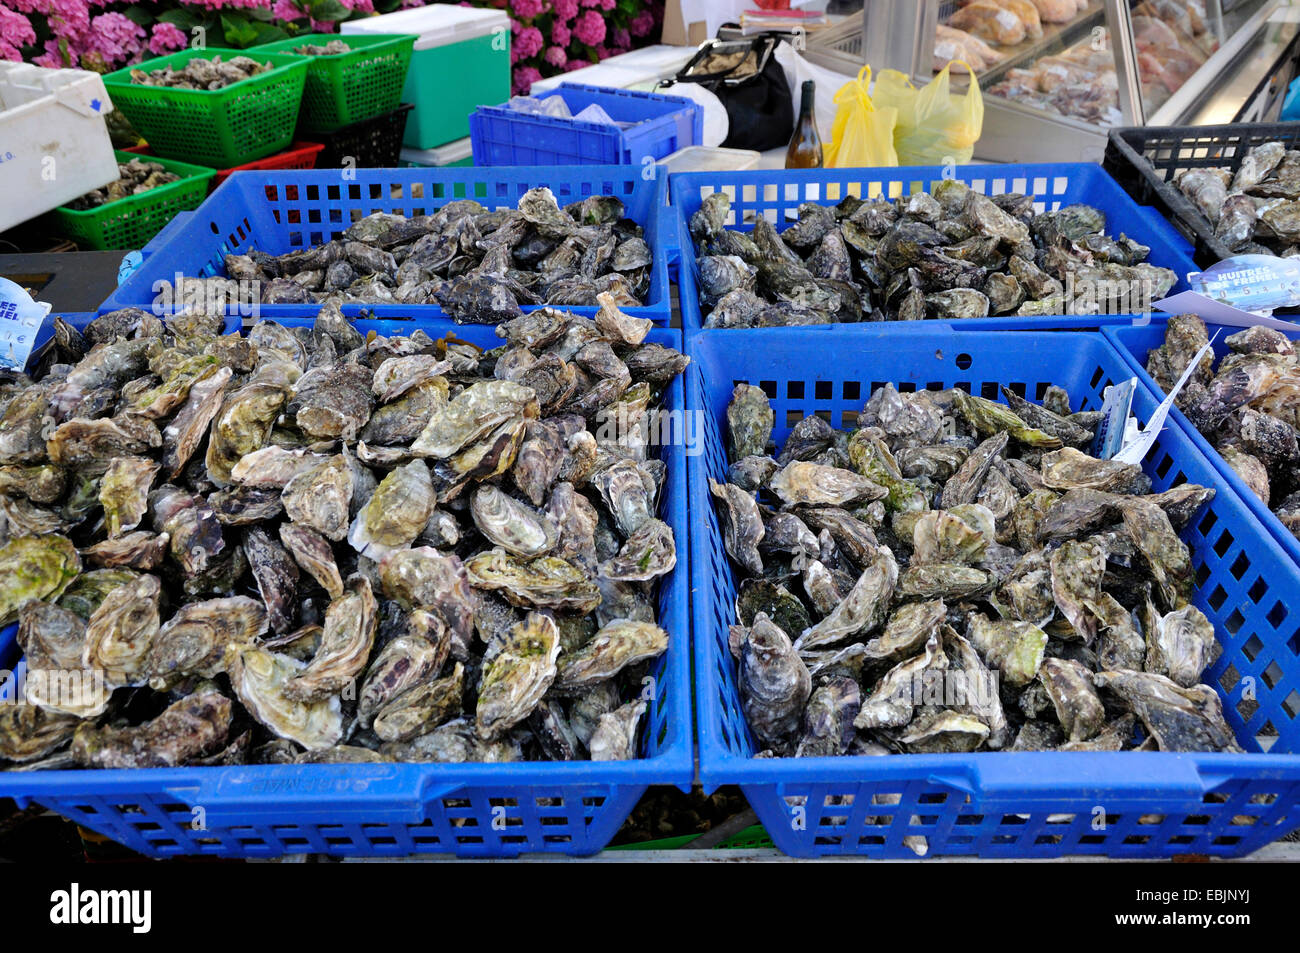 oysters (Ostreidae), fresh oysters in baskets at a market stand, France, Brittany, Erquy Stock Photo